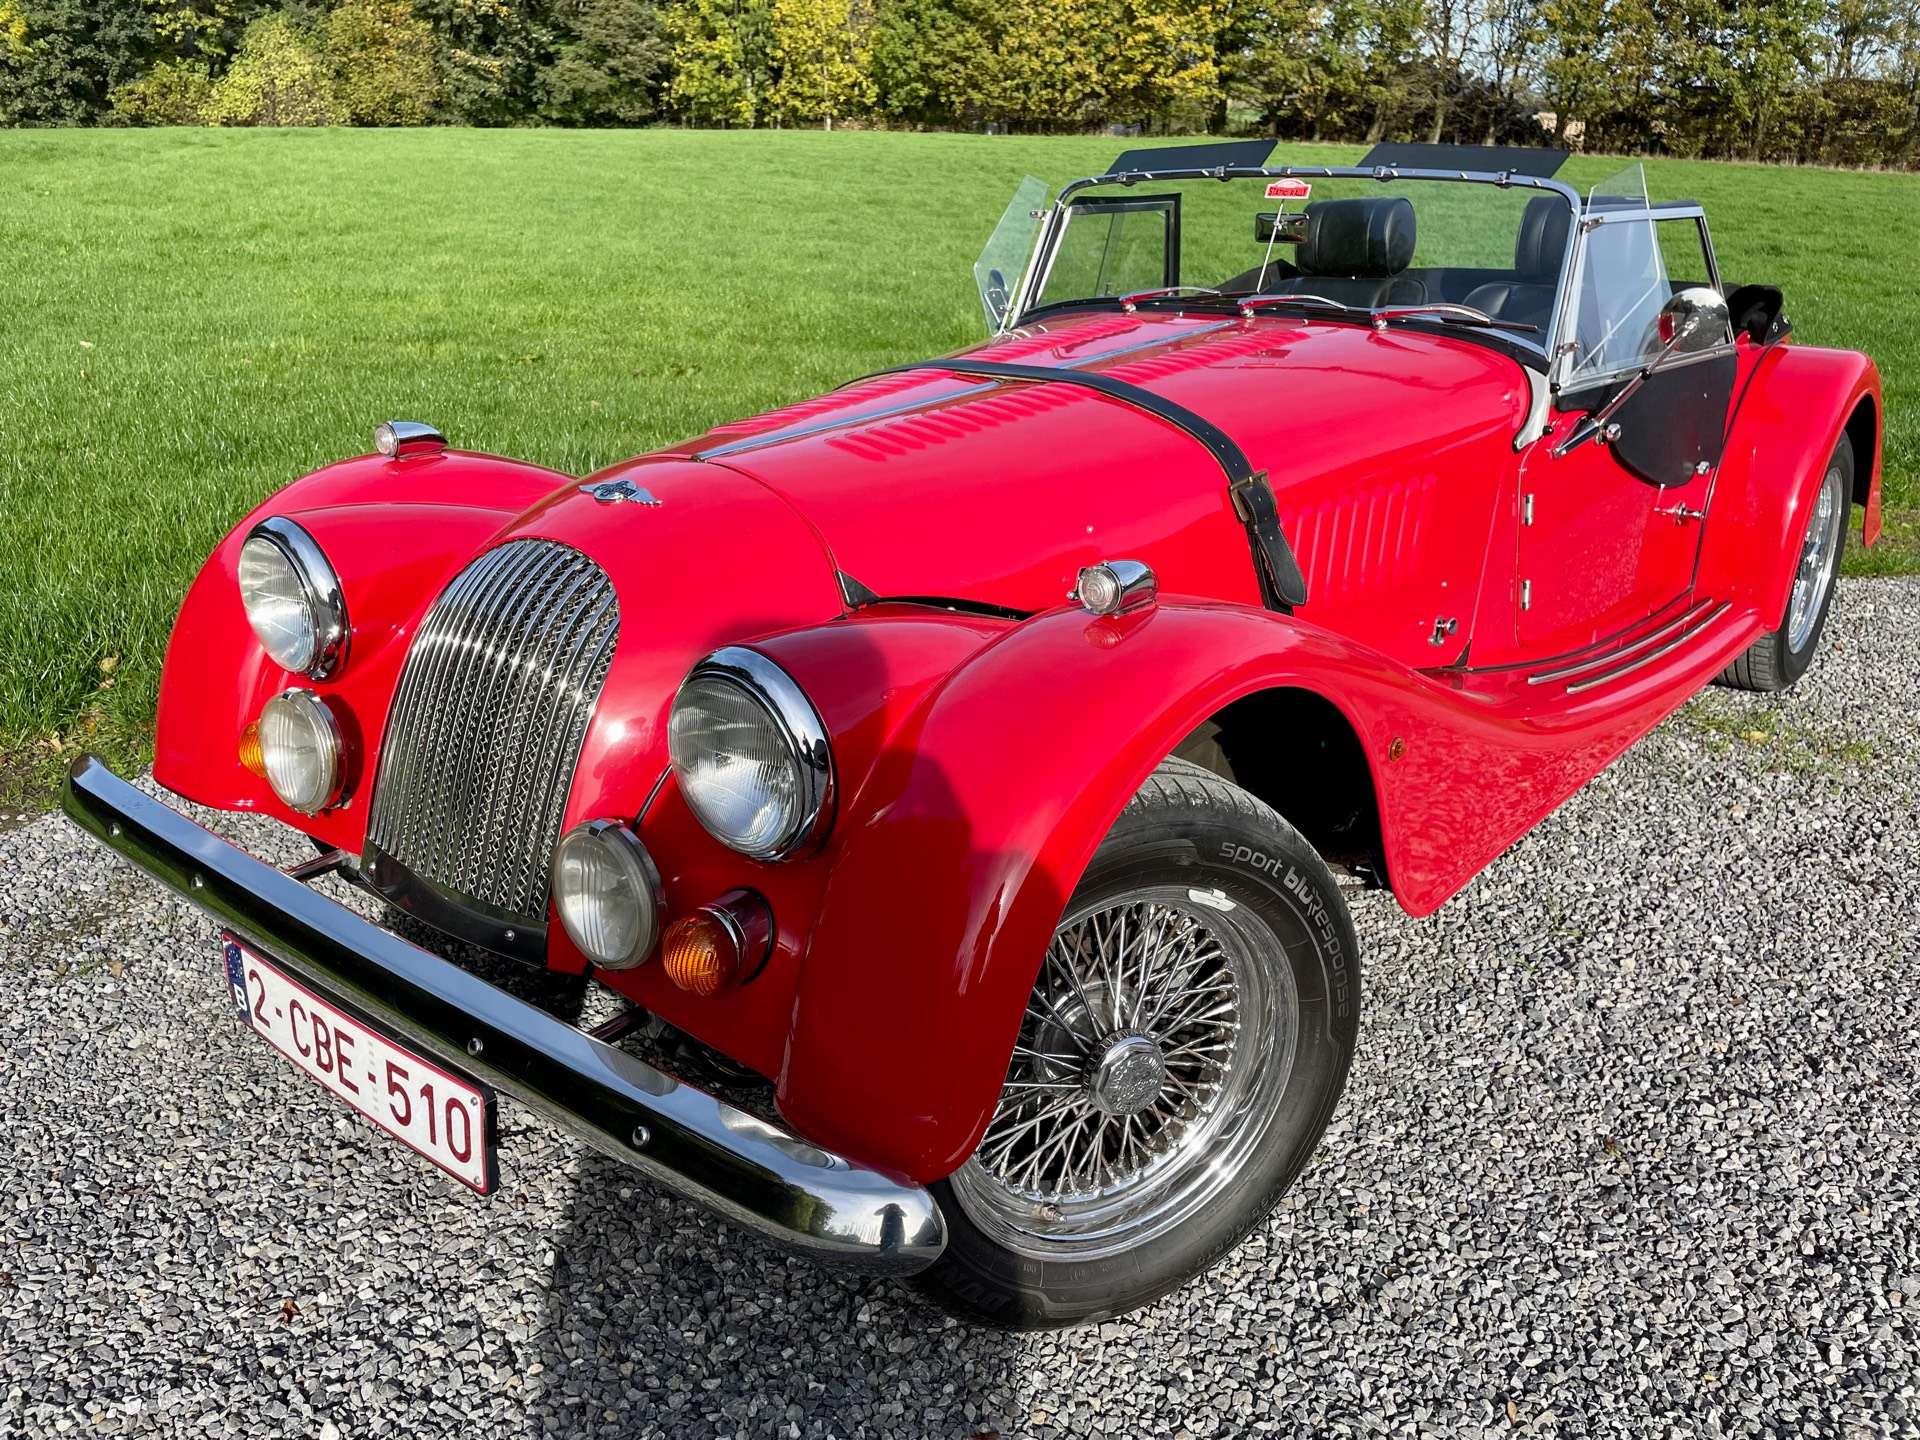 Morgan 4/4 Convertible in Red used in Ghlin for € 36,990.-